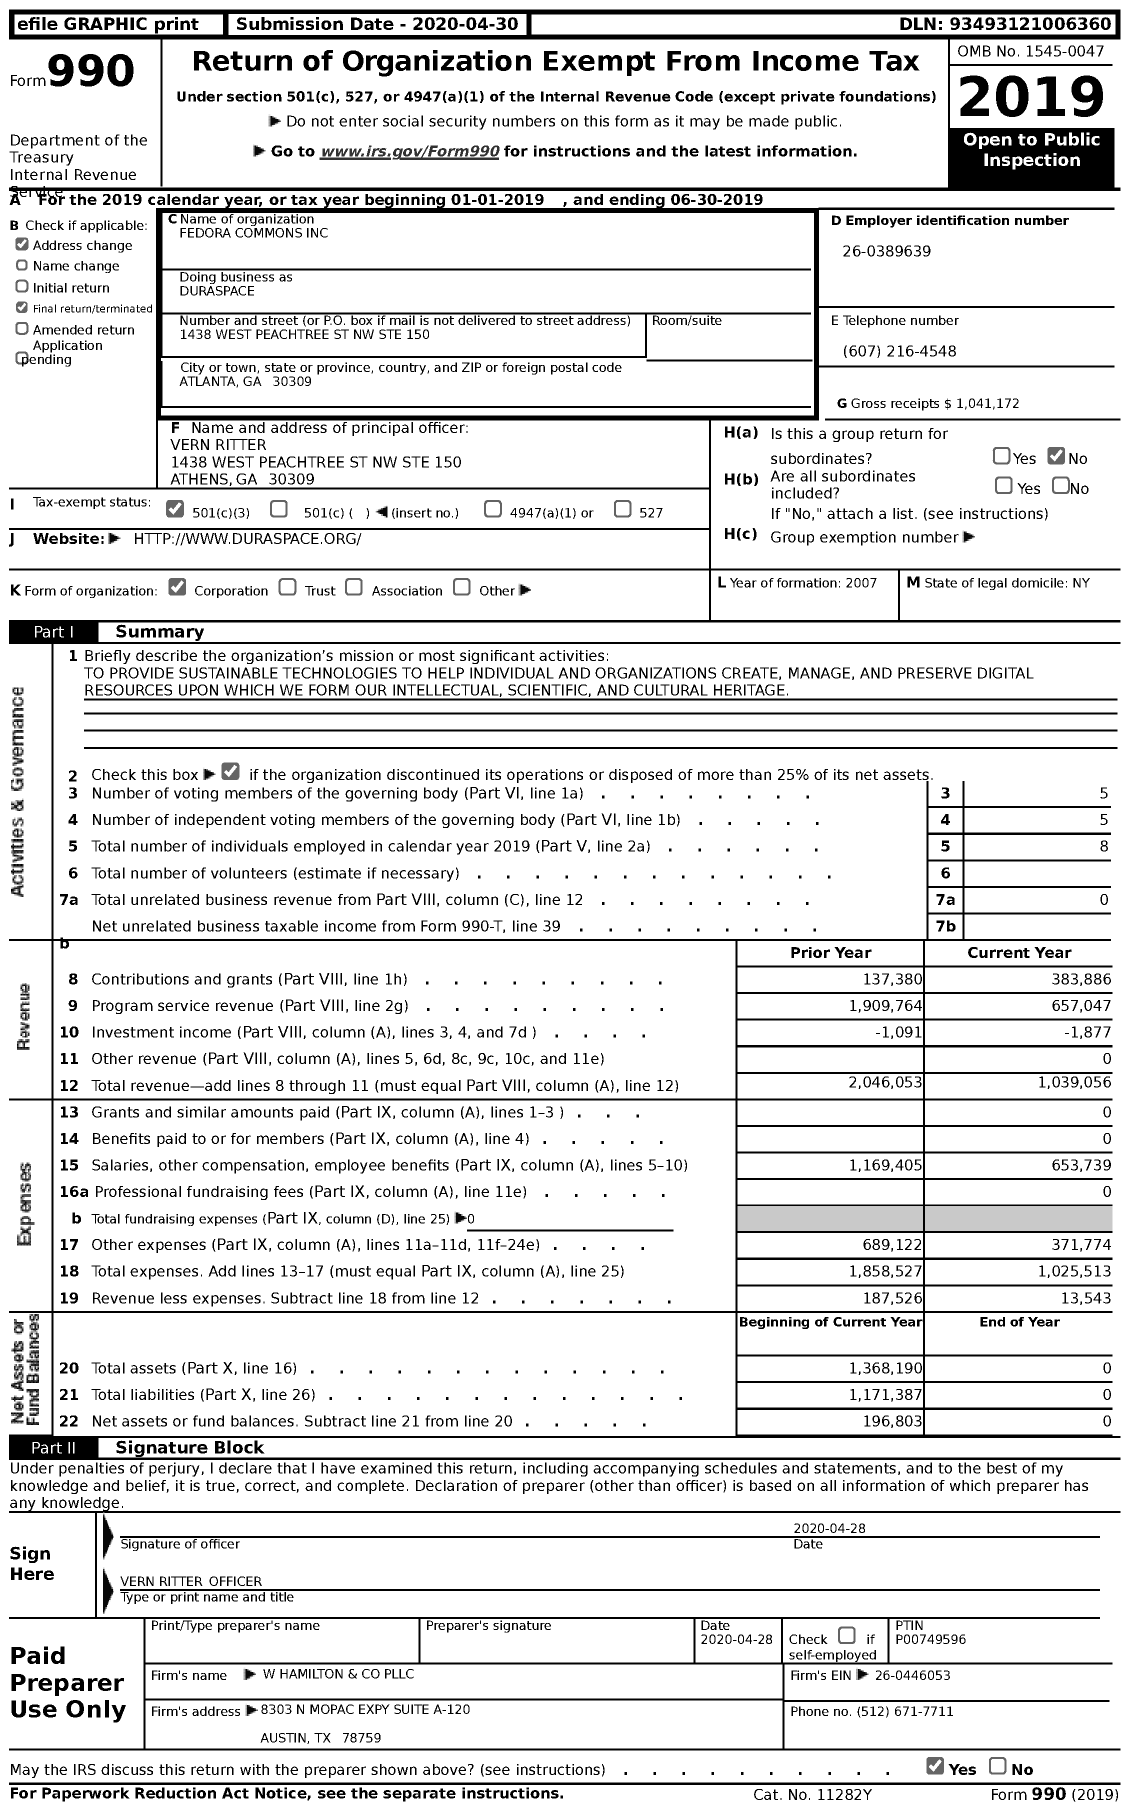 Image of first page of 2018 Form 990 for DuraSpace